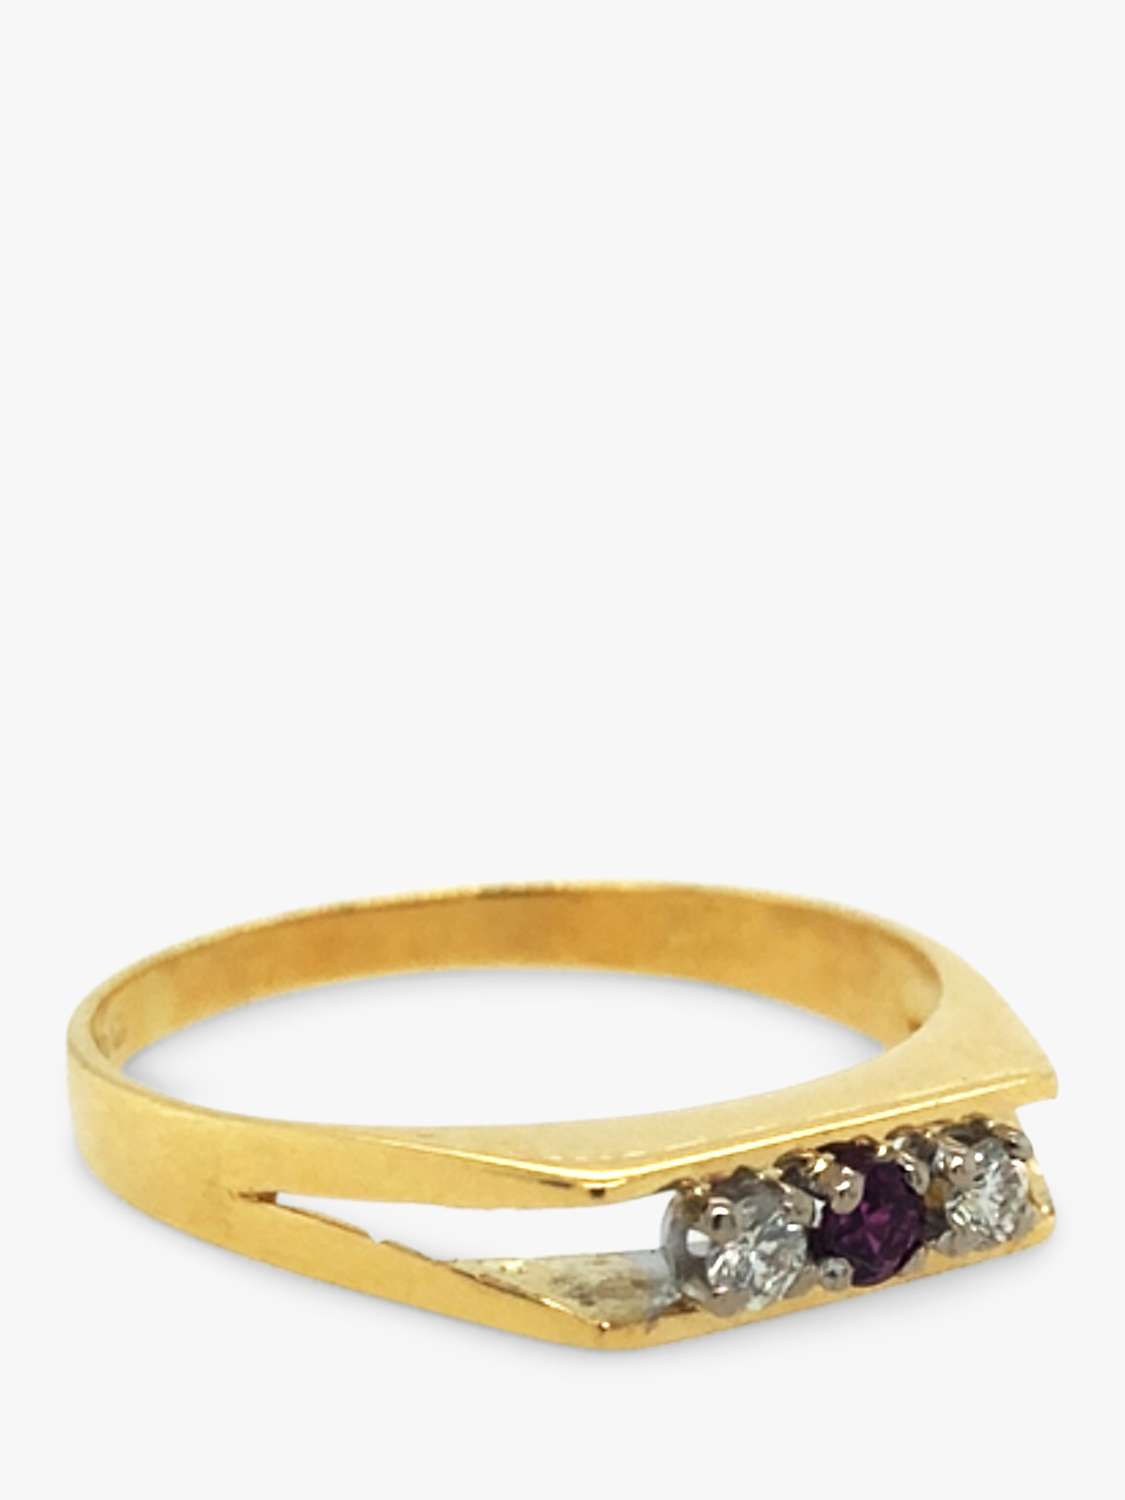 Buy VF Jewellery 18ct White & Yellow Gold Diamond & Ruby Second Hand Bar Ring Online at johnlewis.com